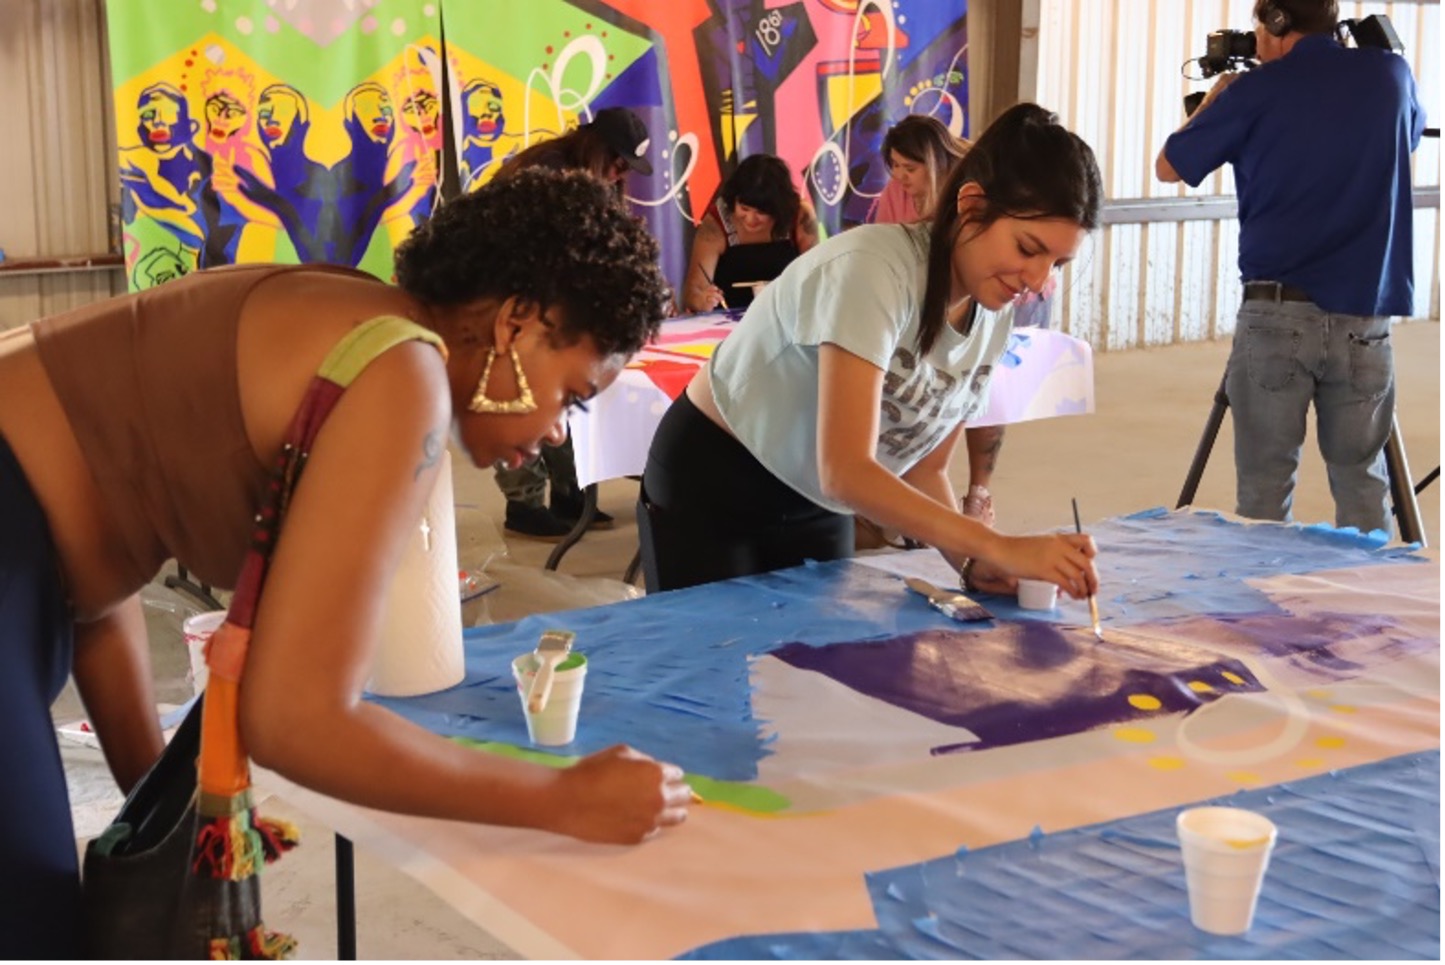 Art of Four participants painting the mural